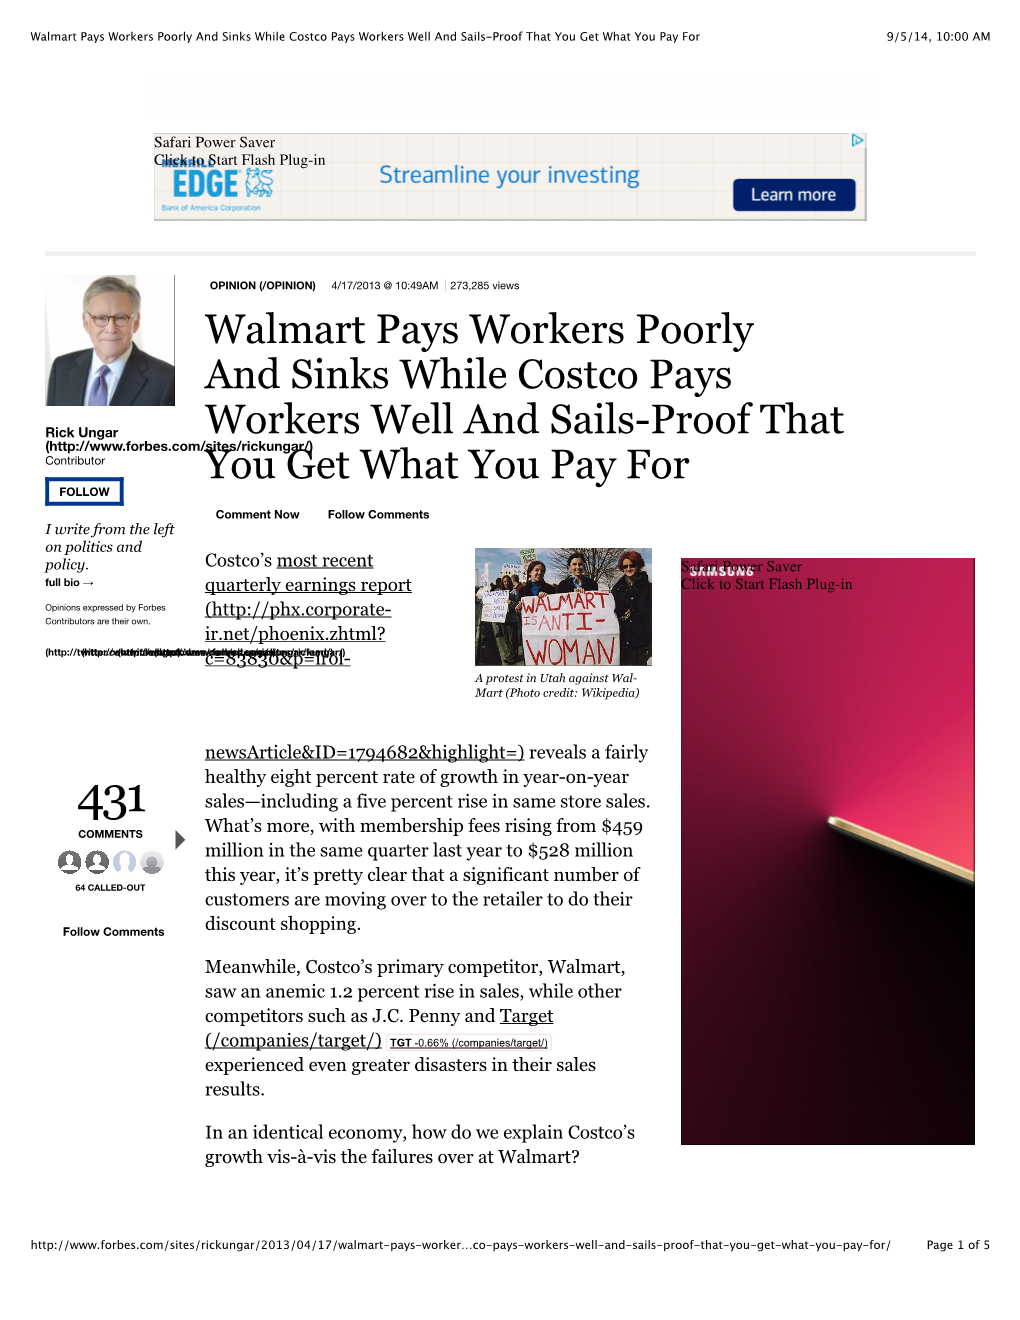 Walmart Pays Workers Poorly and Sinks While Costco Pays Workers Well and Sails-Proof That You Get What You Pay for 9/5/14, 10:00 AM